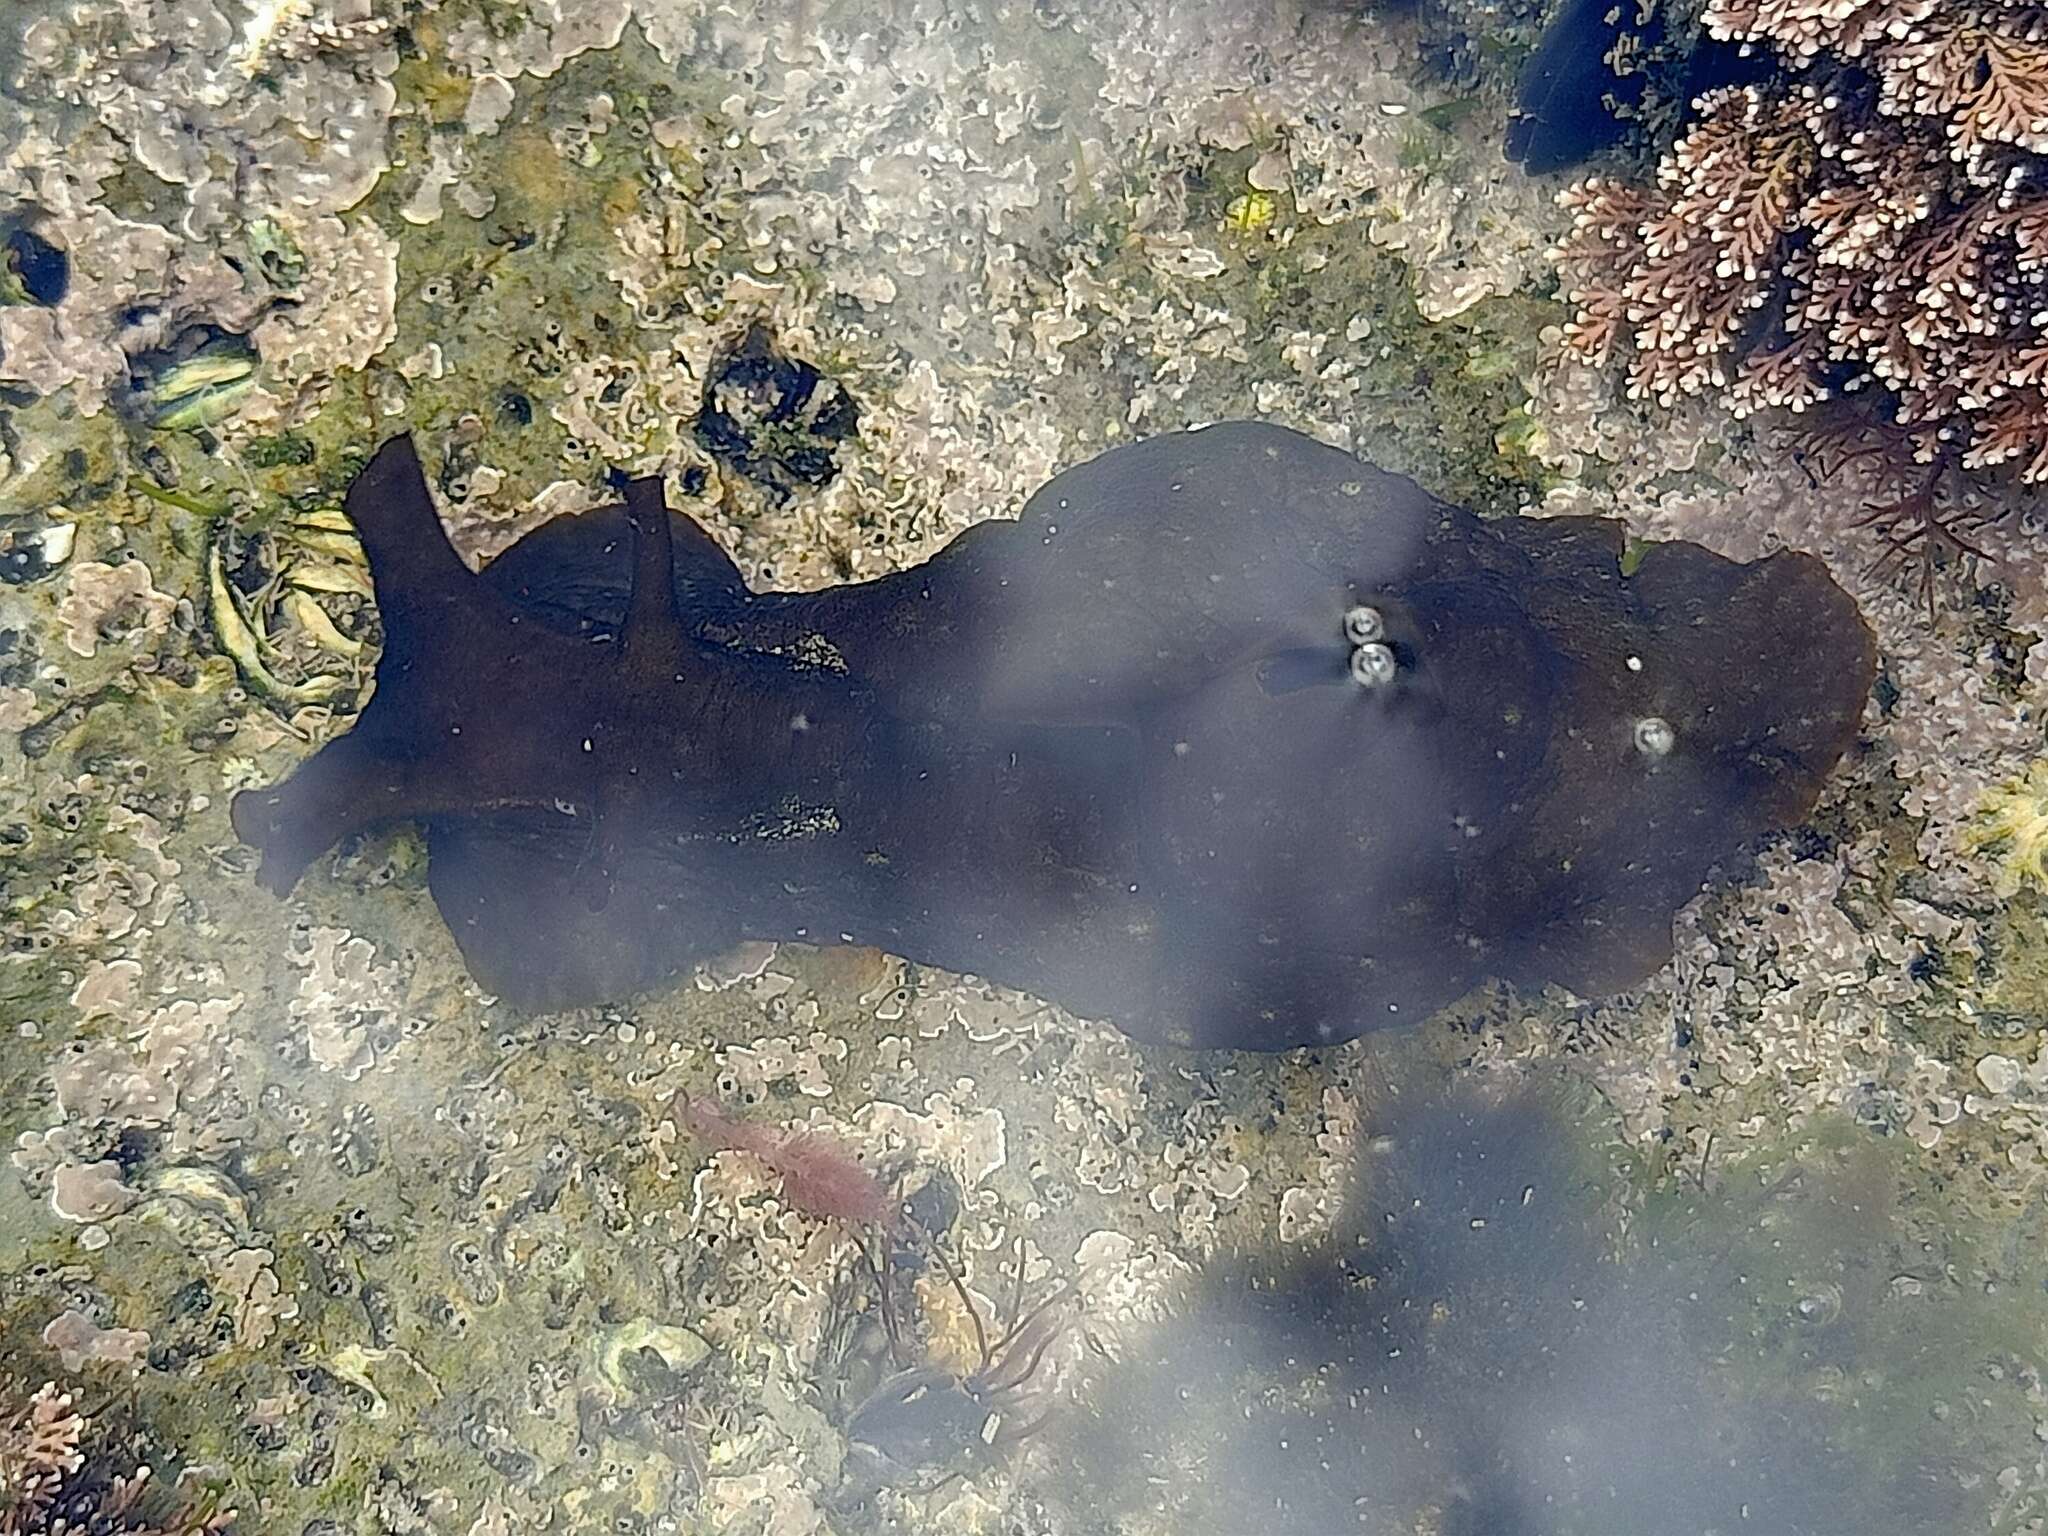 Image of spotted sea hare